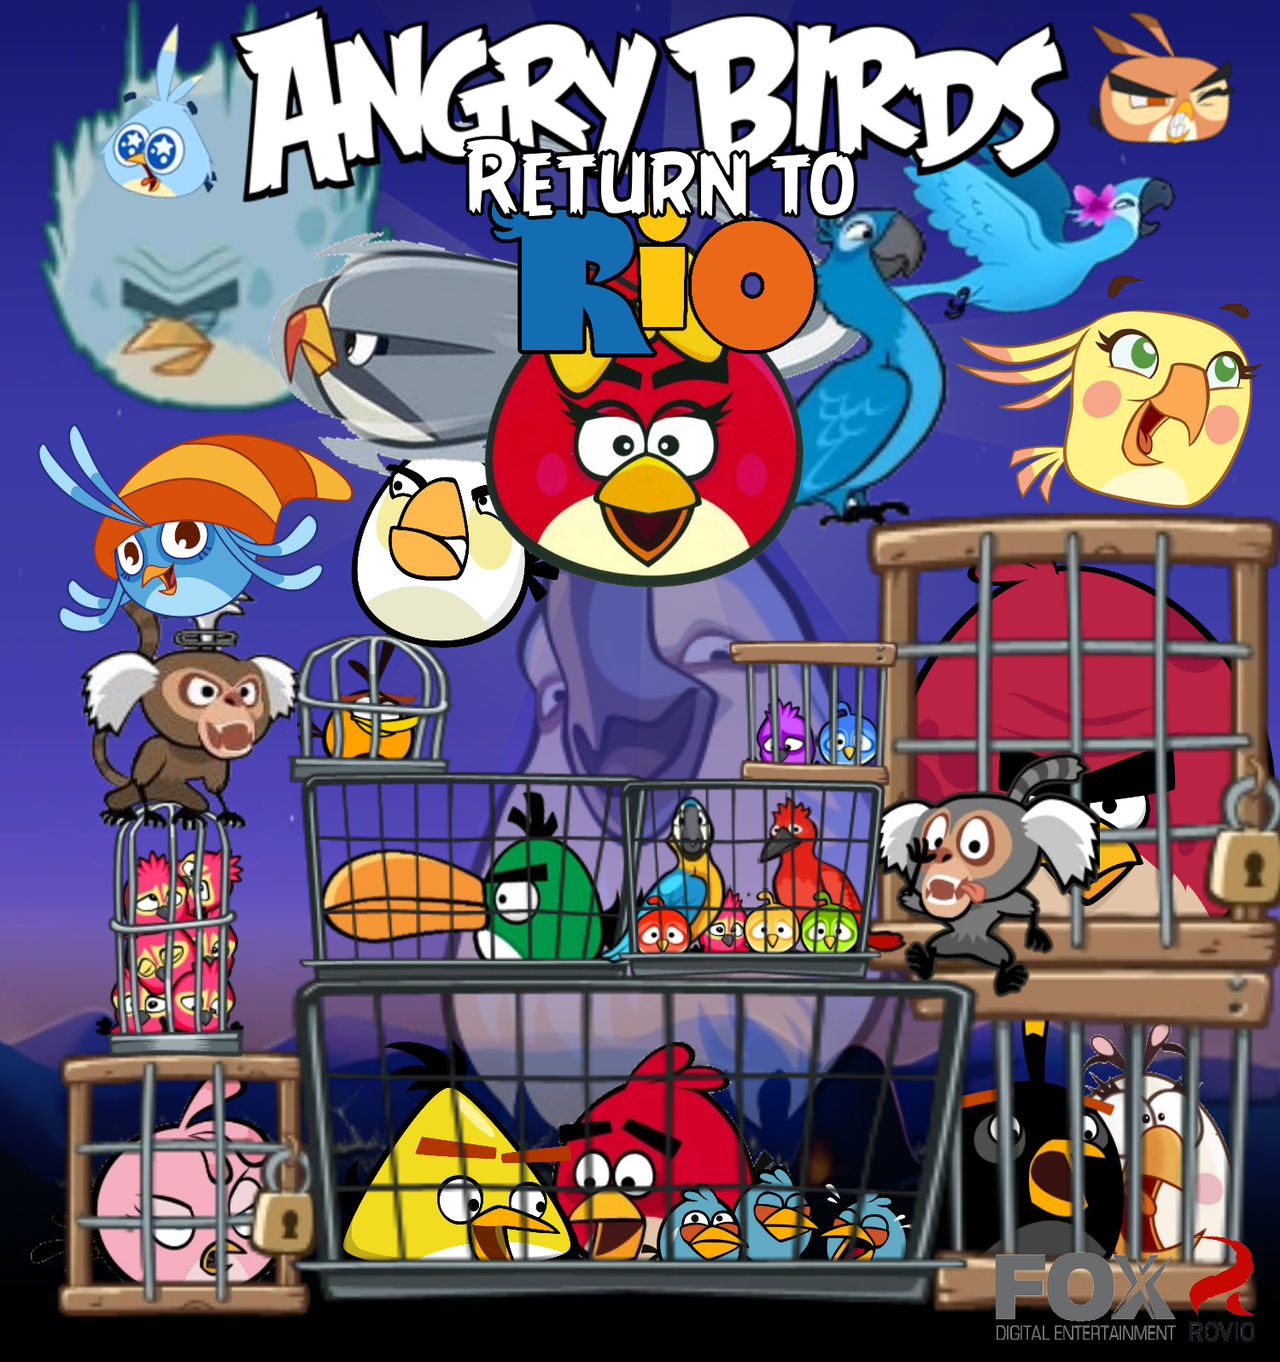 Bubbles (Angry Birds) Fan Casting